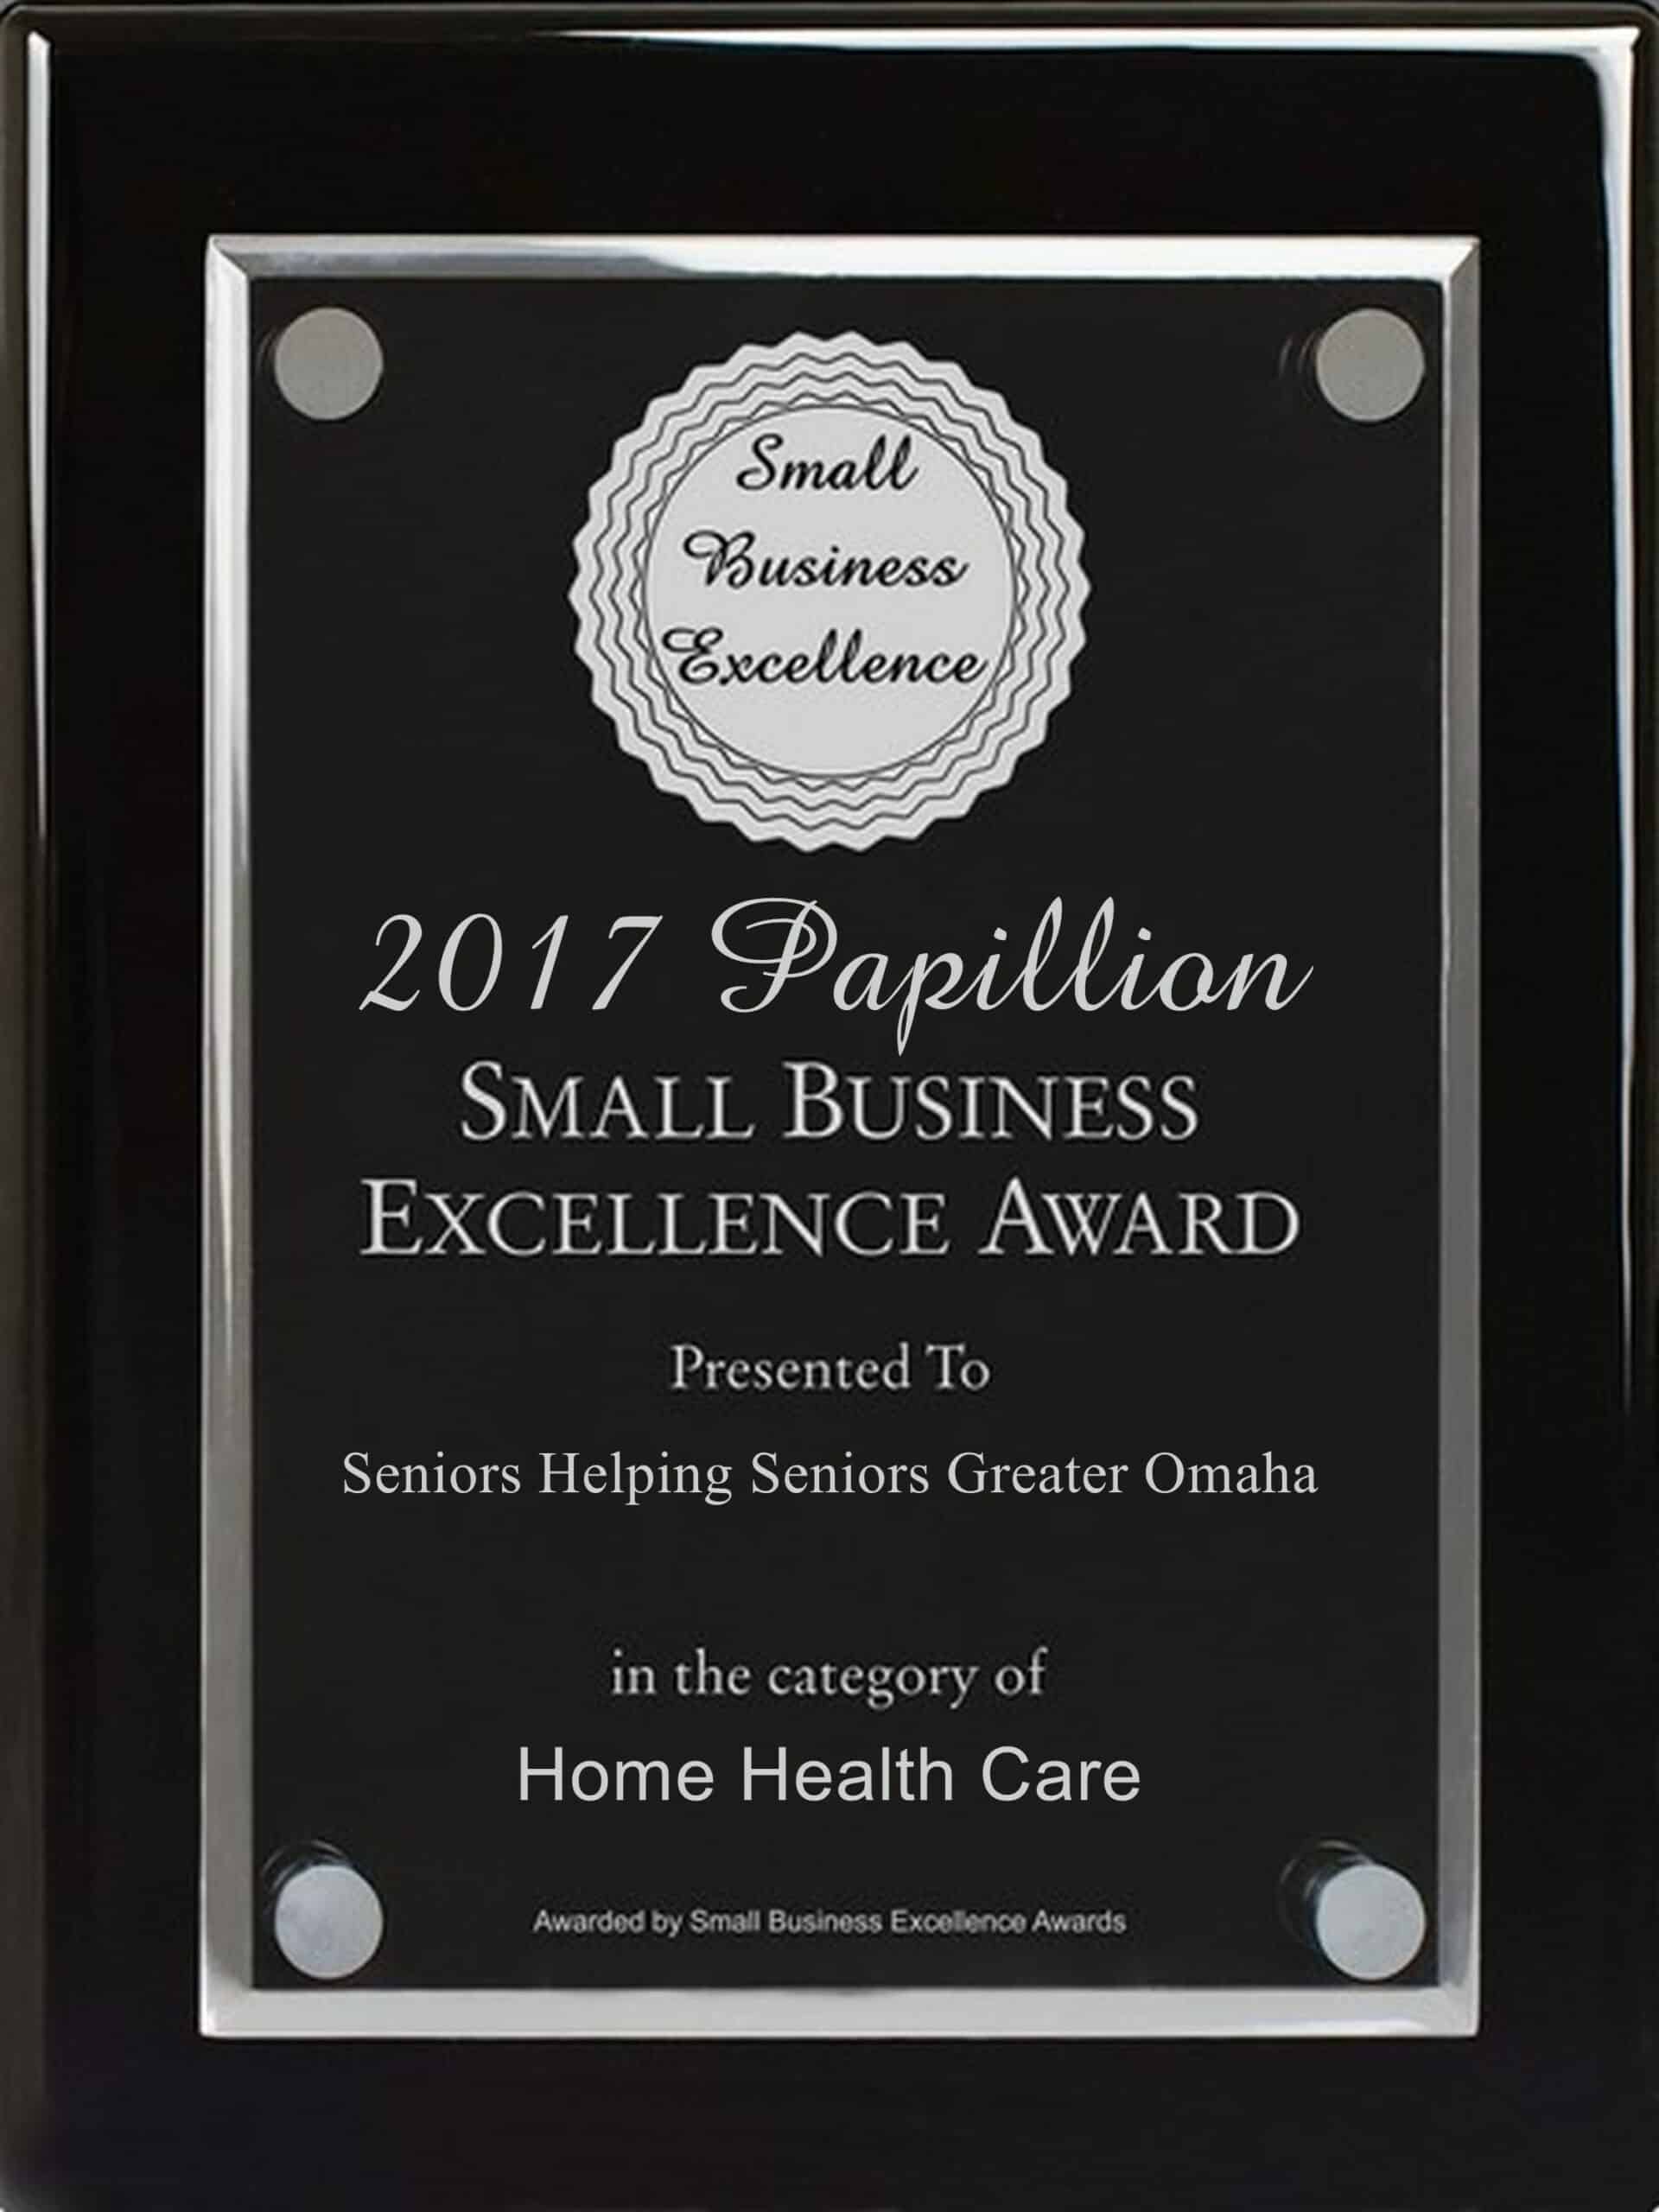 Seniors Helping Seniors Greater Omaha selected for 2017 Papillion Small Business Excellence Award